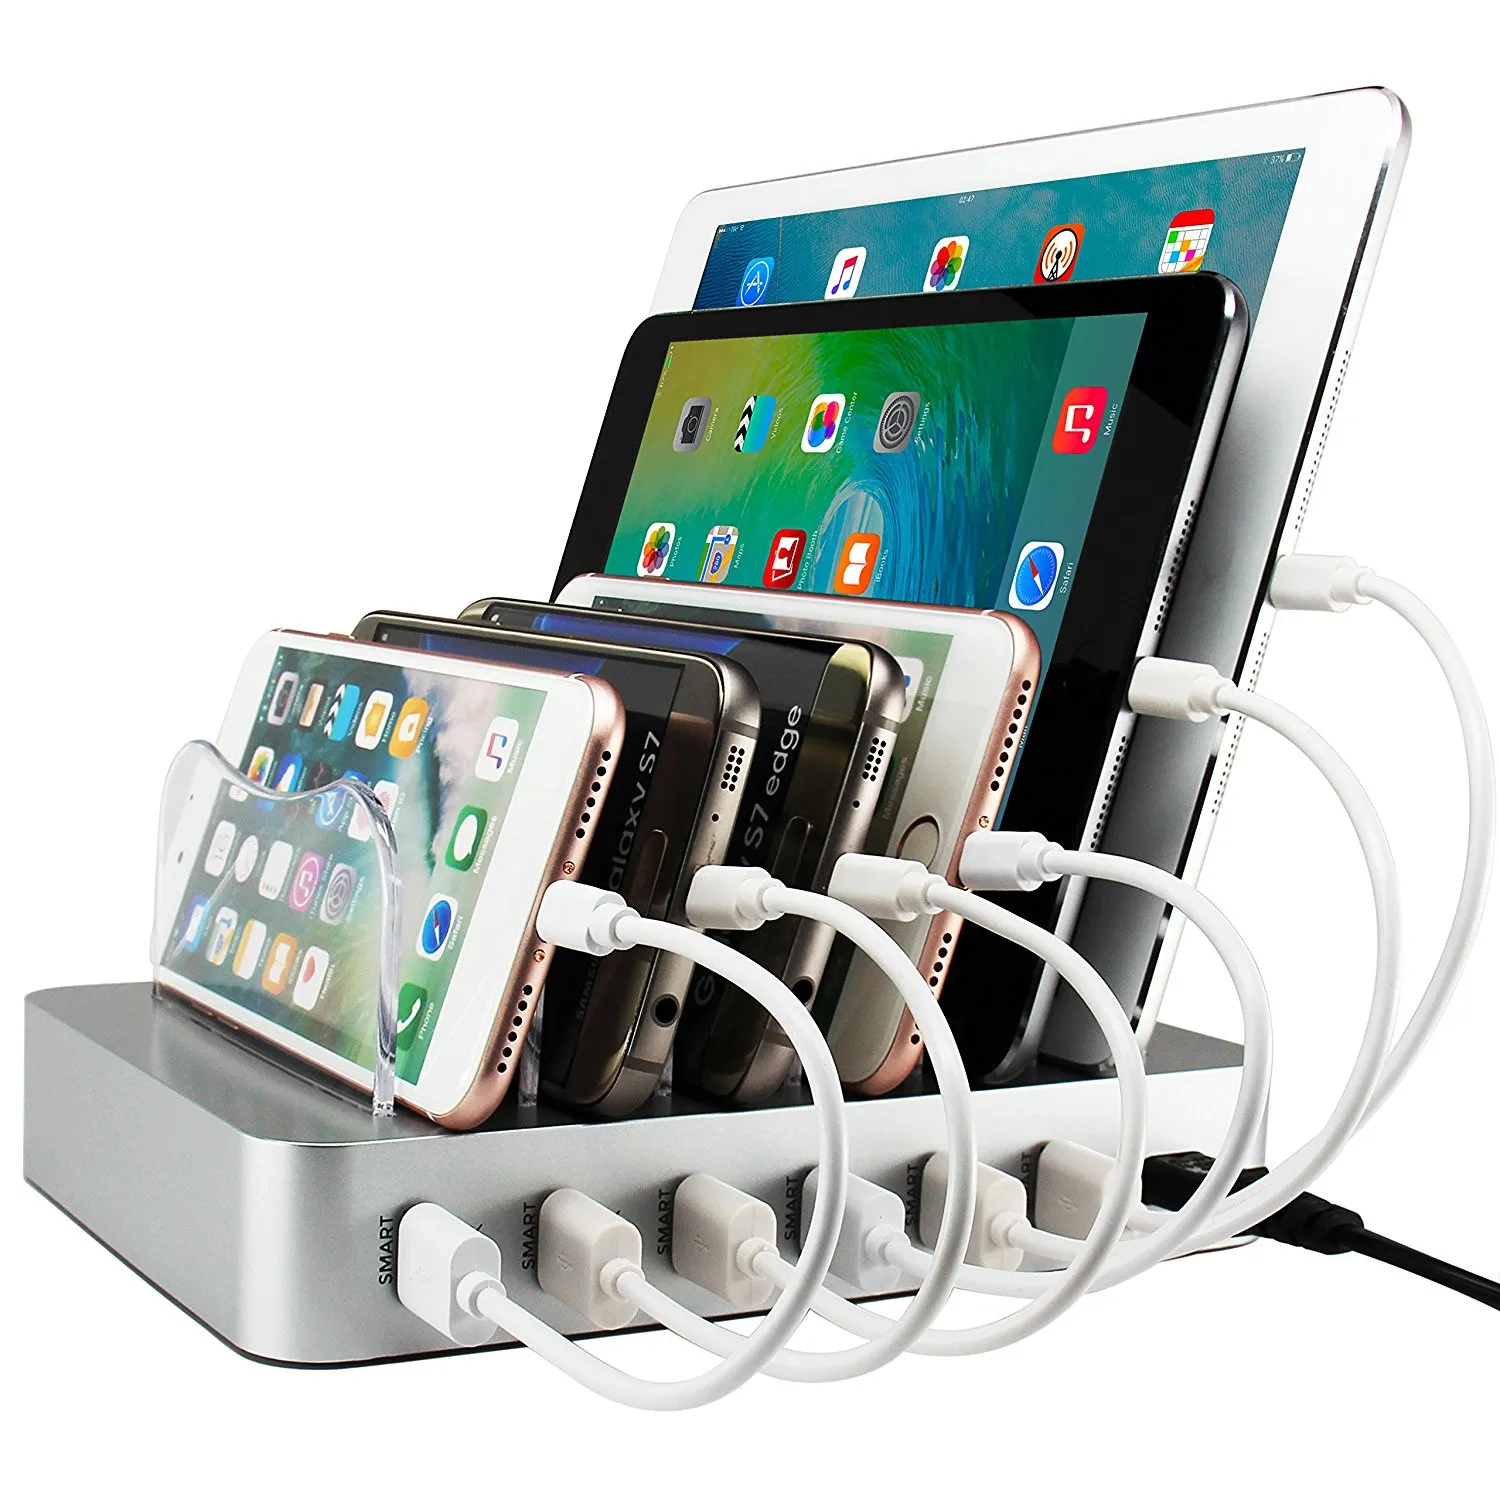 

MIQ Portable Mobile phone charger 6 USB chargers smart fast docking Multi function mobile phone charging station, White, black, silver